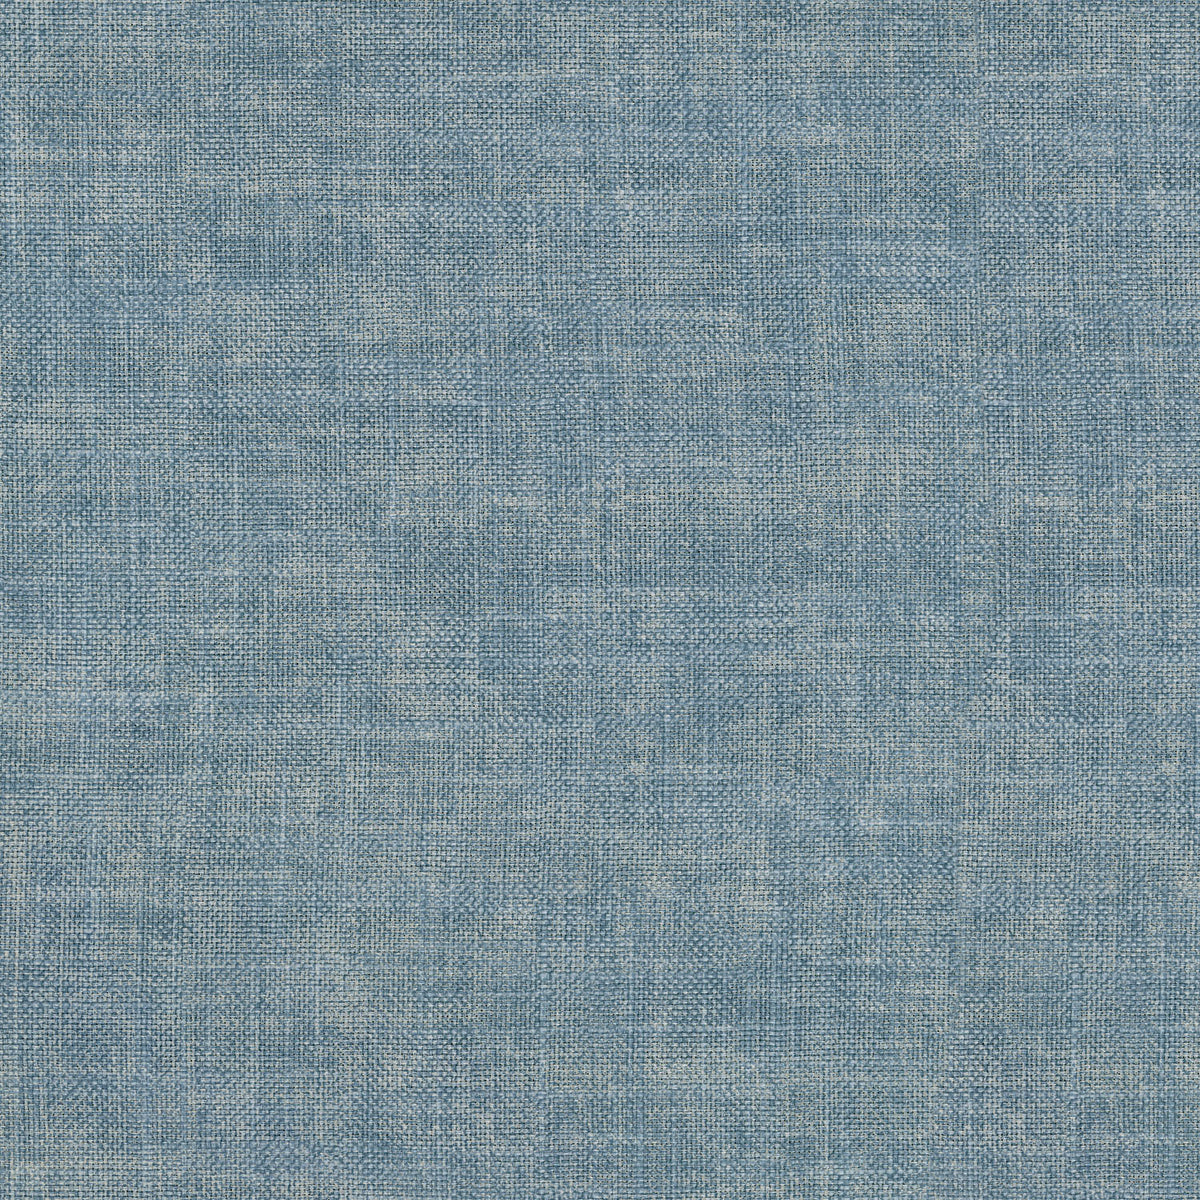 P/K Lifestyles Desmond Solid - Chambray 409376 Upholstery Fabric